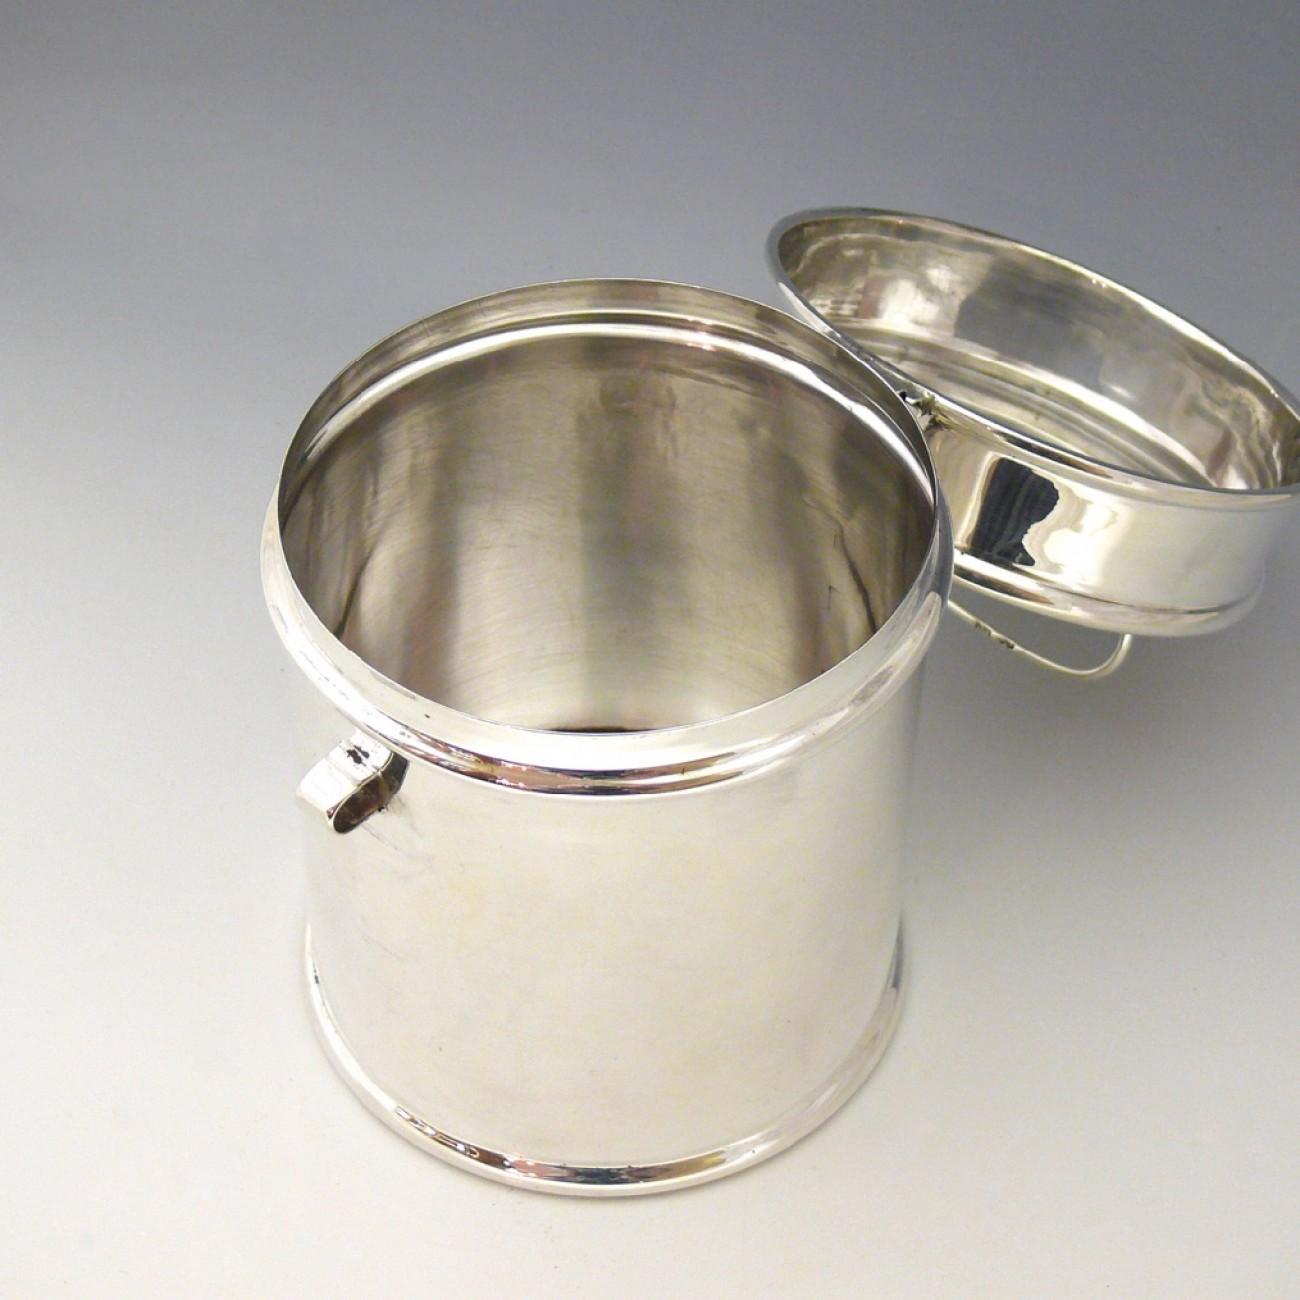 A fine sterling silver tiffin tin with silver plated padlock and key. Hallmarked London 1911.

Dimensions: 11 cm/4? inches (diameter) x 14 cm/5½ inches (height)

‘Tiffin’ was originally a term used to denote the British custom of stopping to take